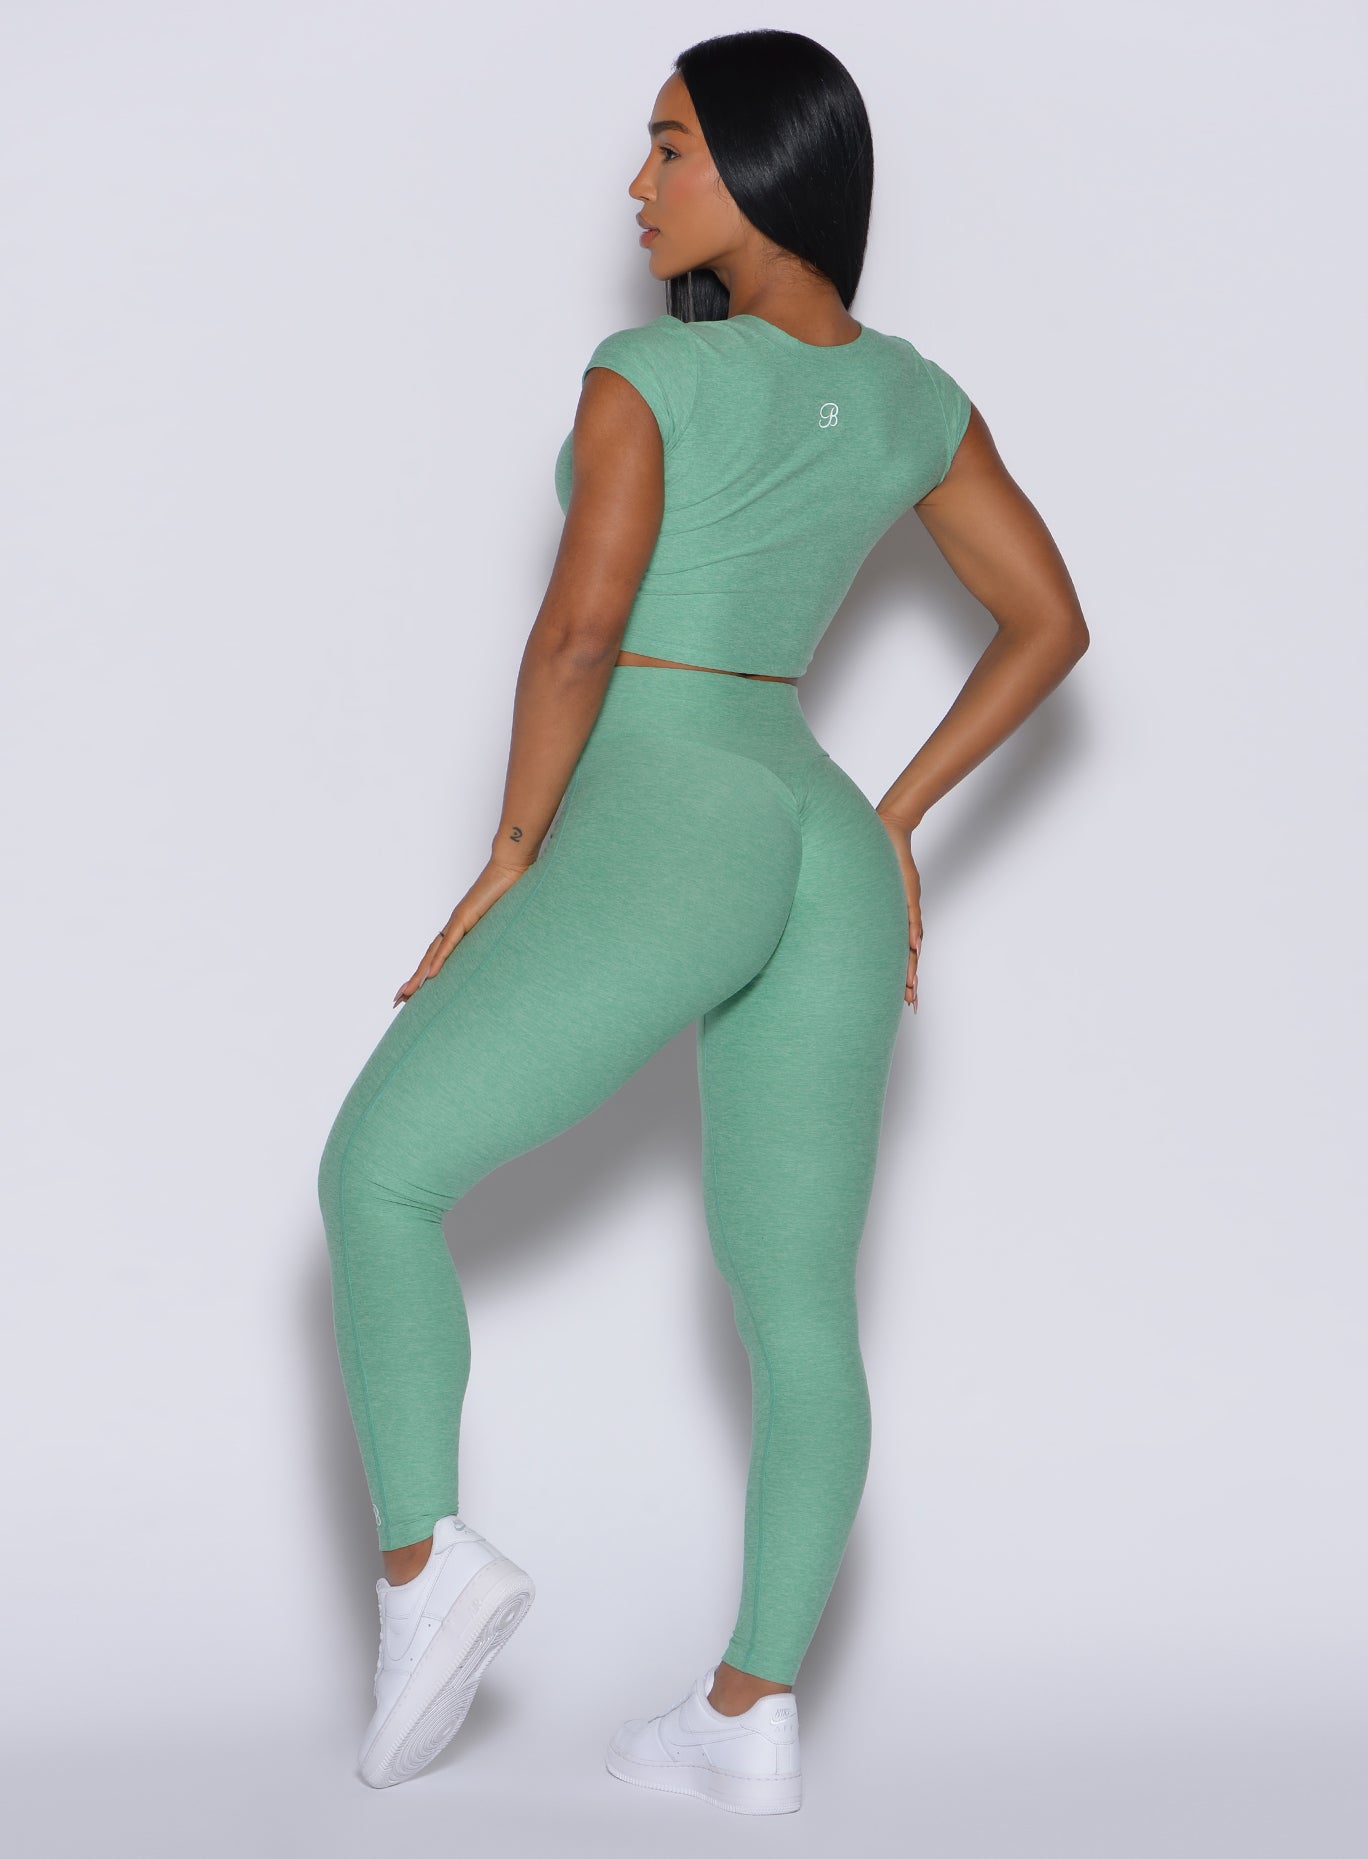 back profile view of model facing to her left wearing the Movement Leggings in Sage color and a matching Tee